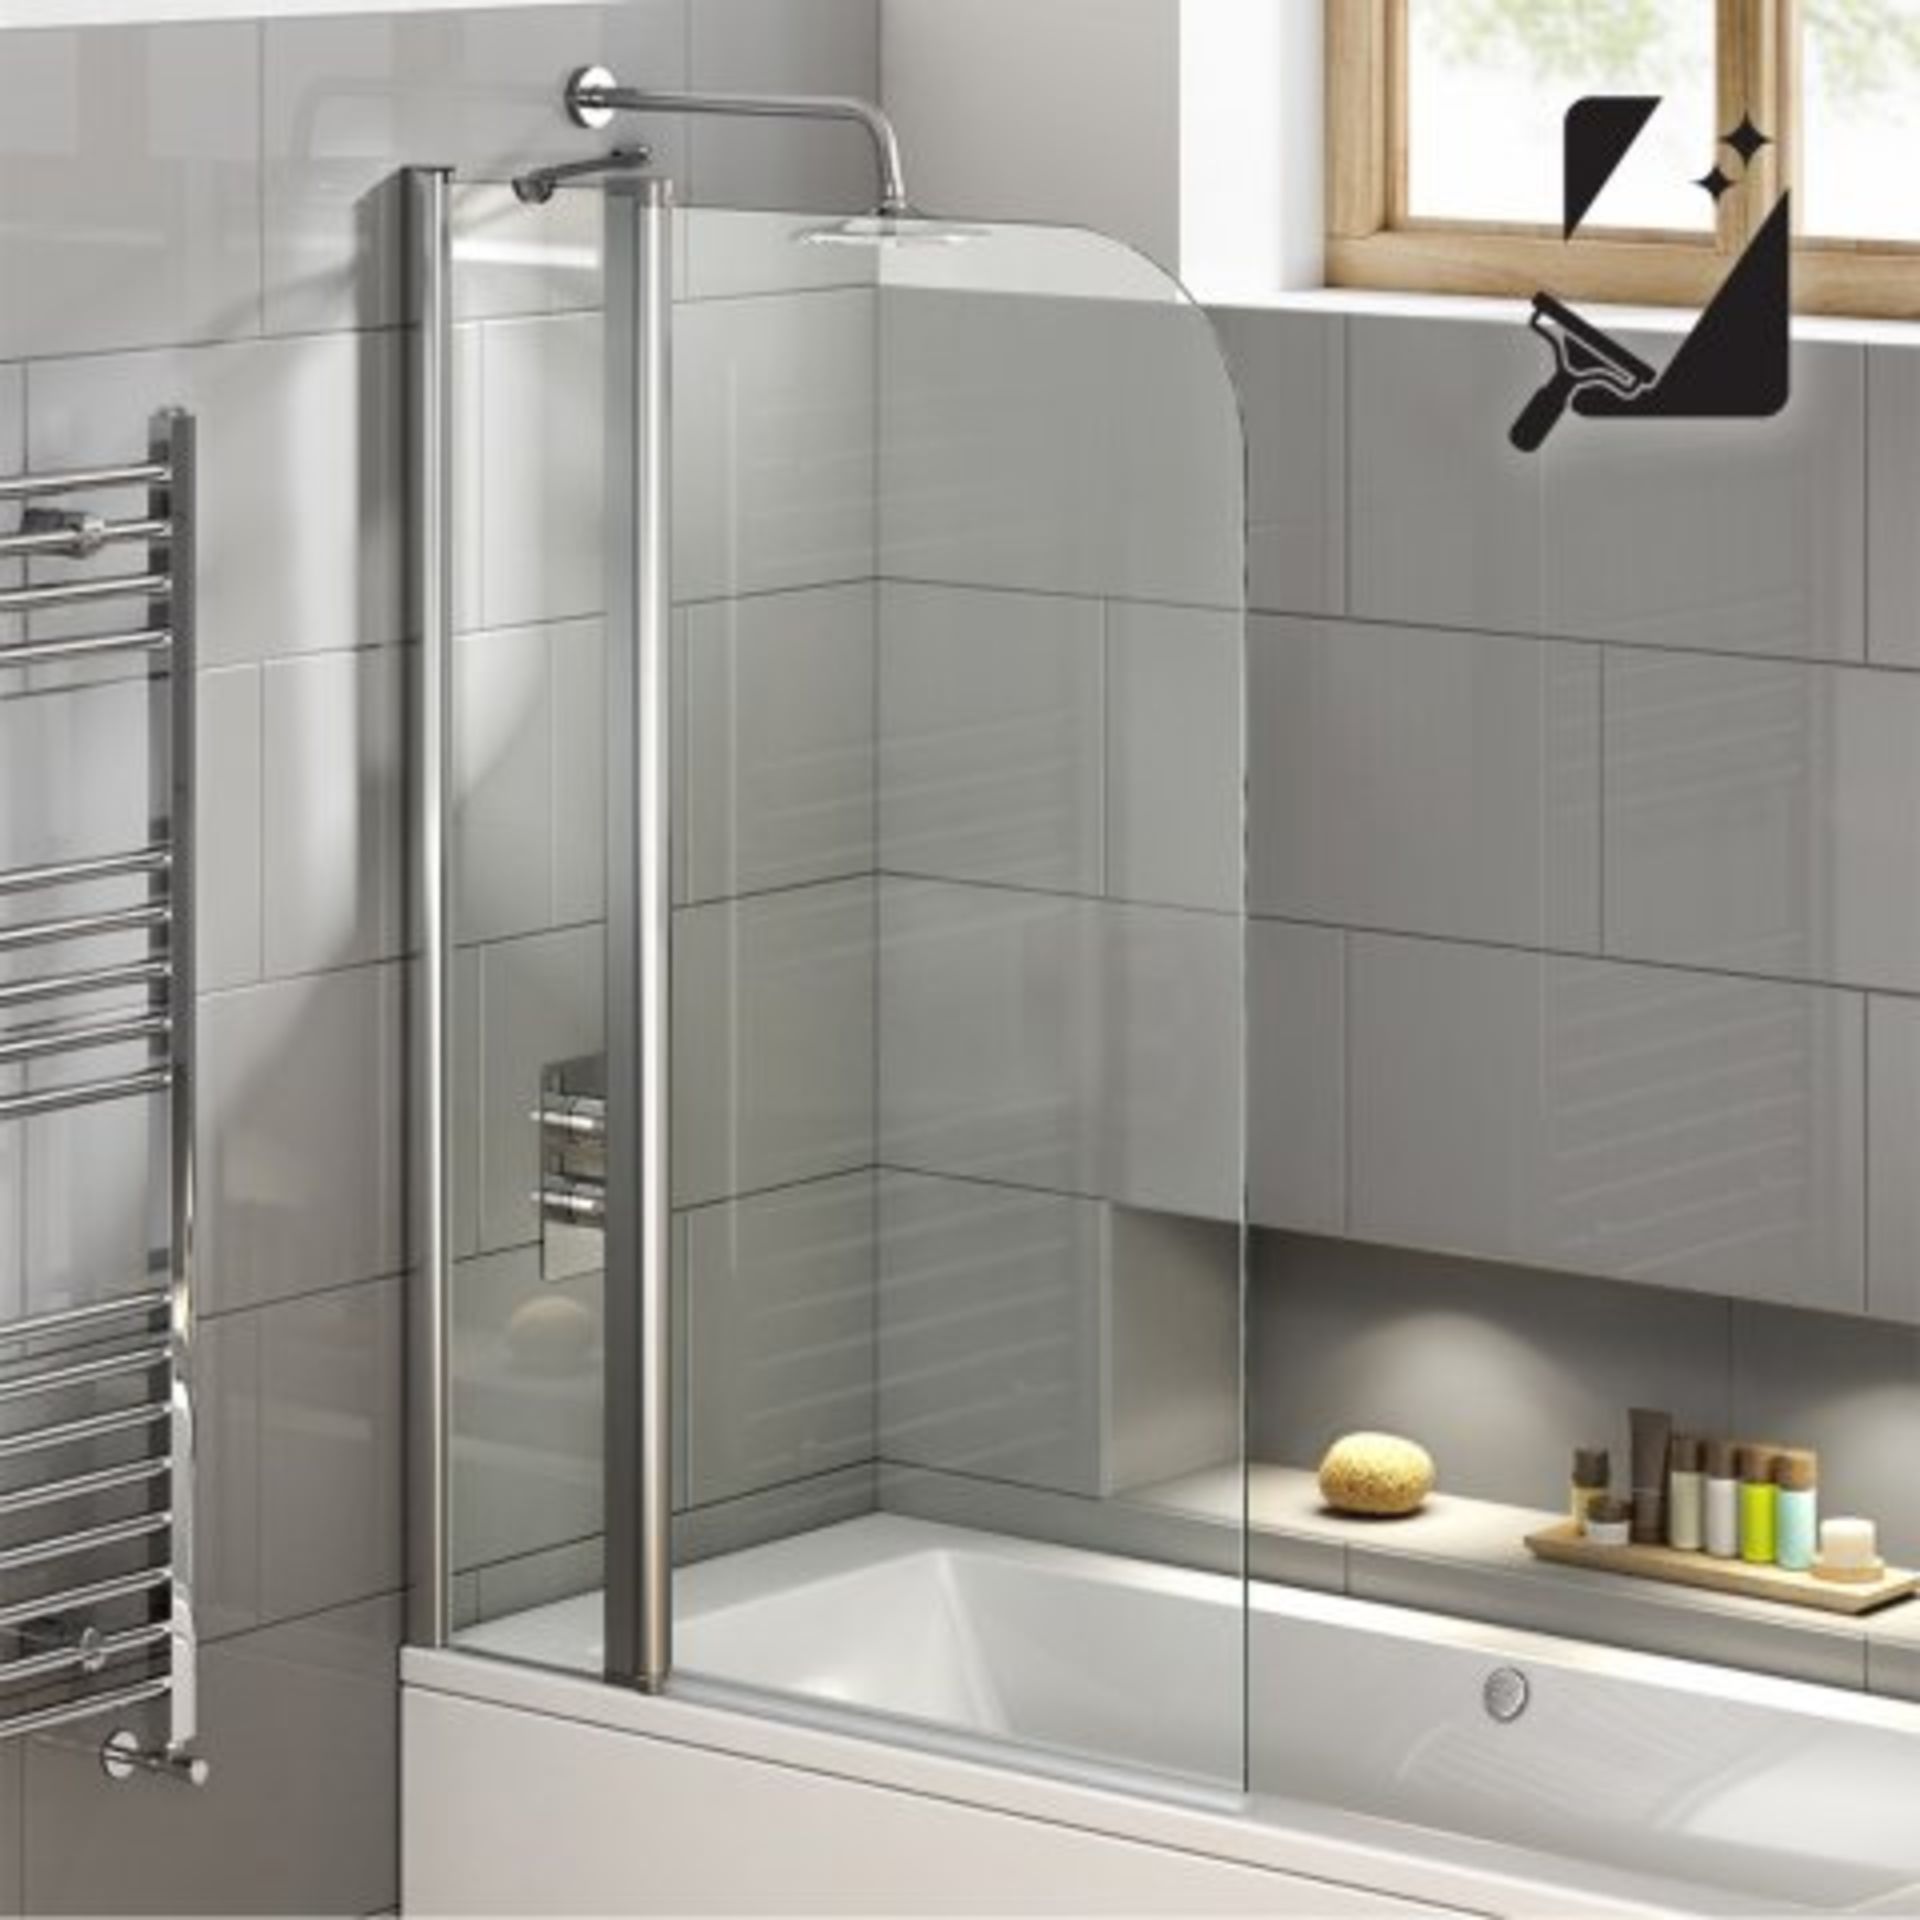 (H132) 1000mm - 6mm - EasyClean Straight Bath Screen. RRP £224.99. The clue is in the name: Easy